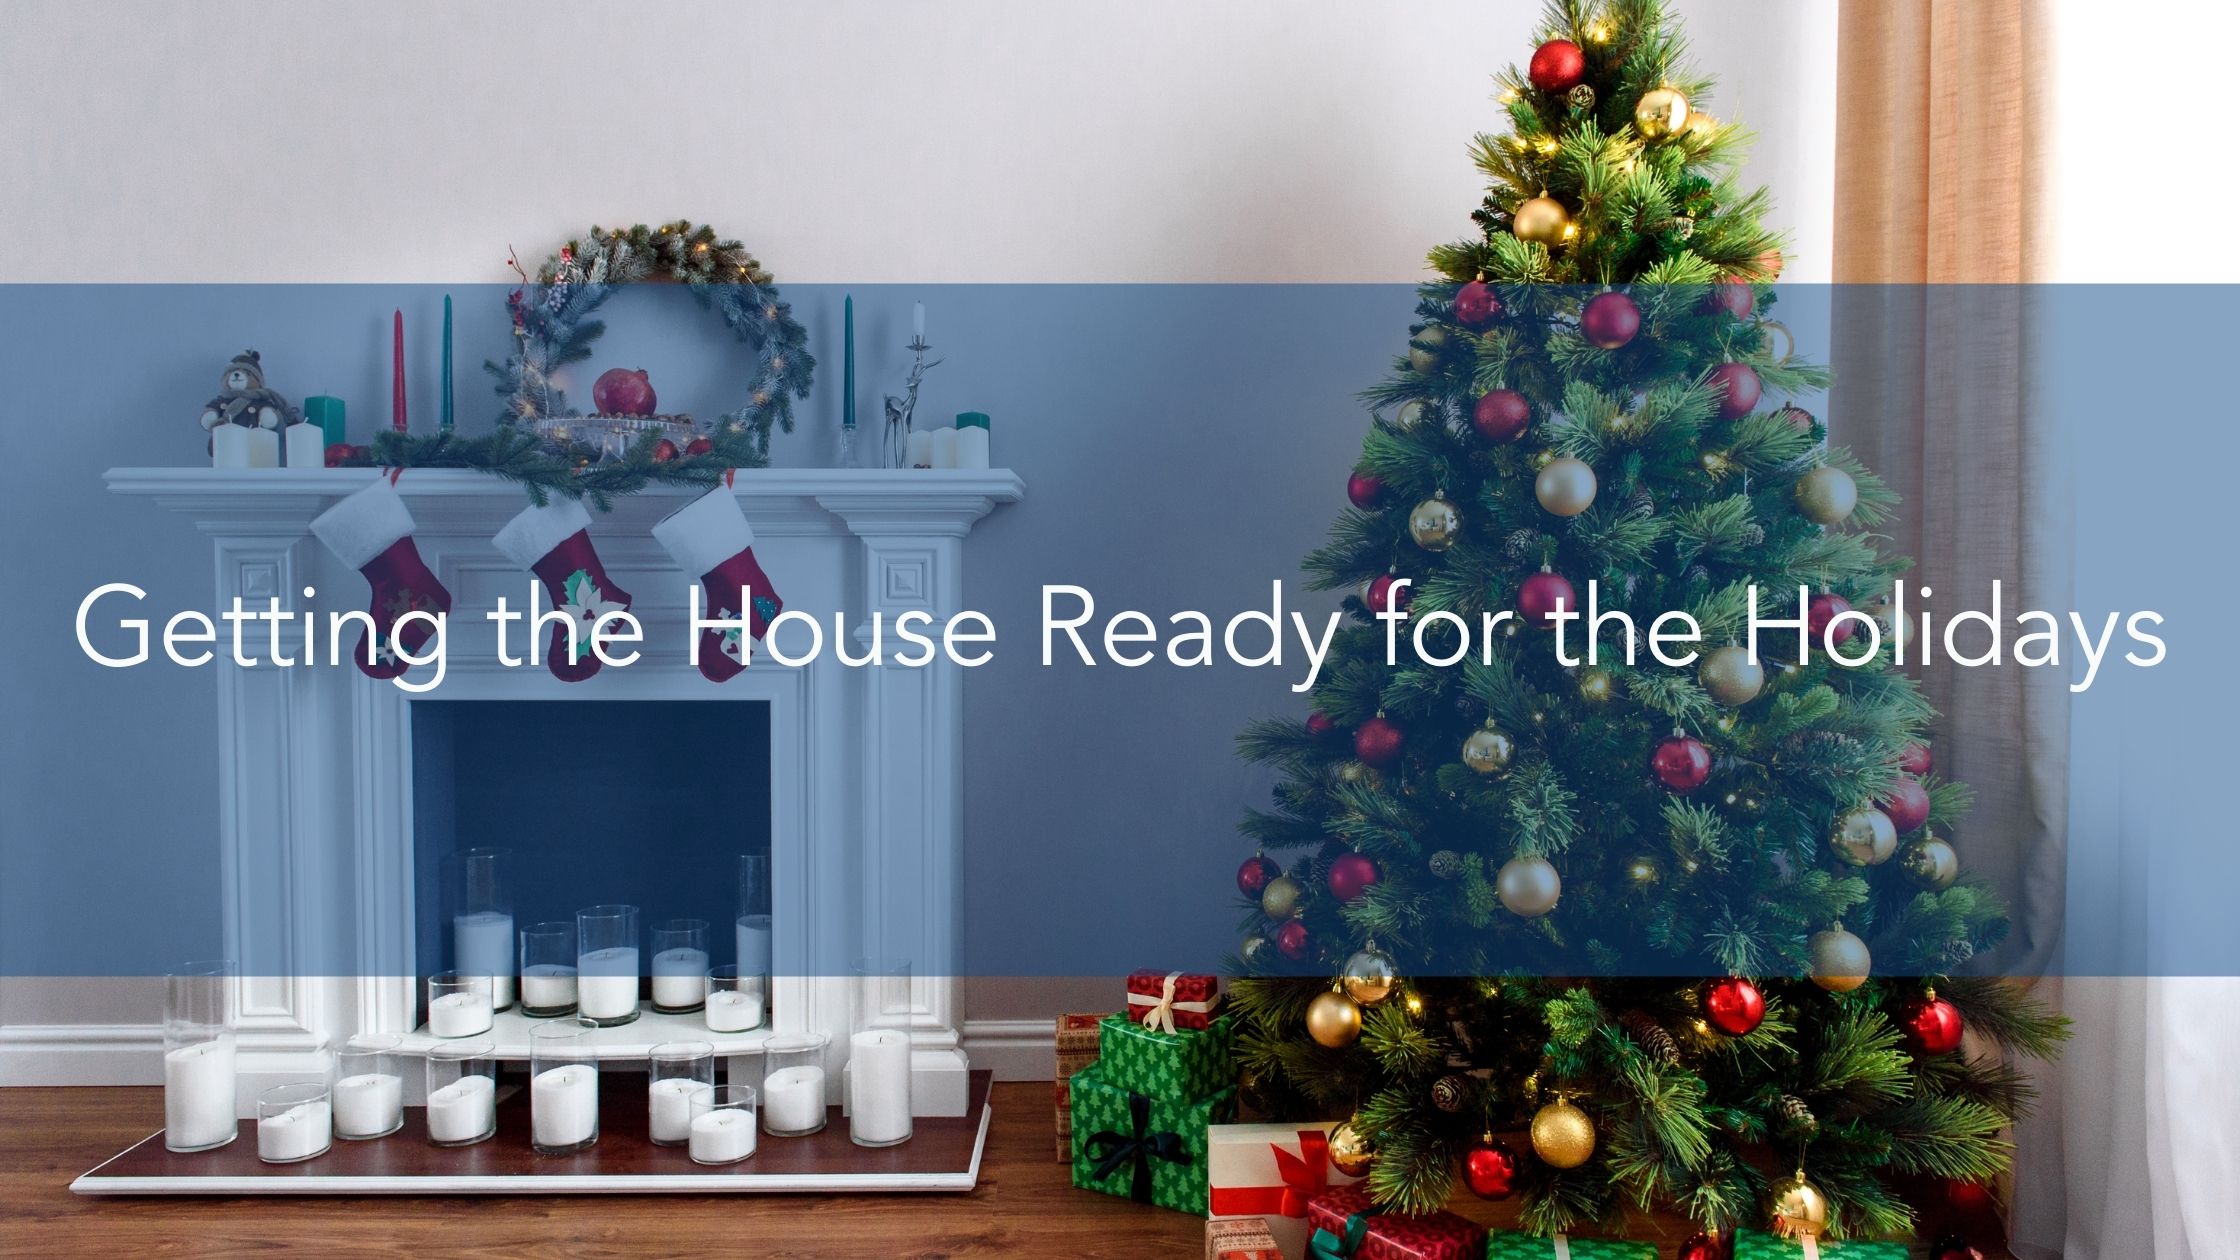 https://handymanconnection.com/wp-content/uploads/2021/11/Getting-the-House-Ready-for-the-Holidays.jpg